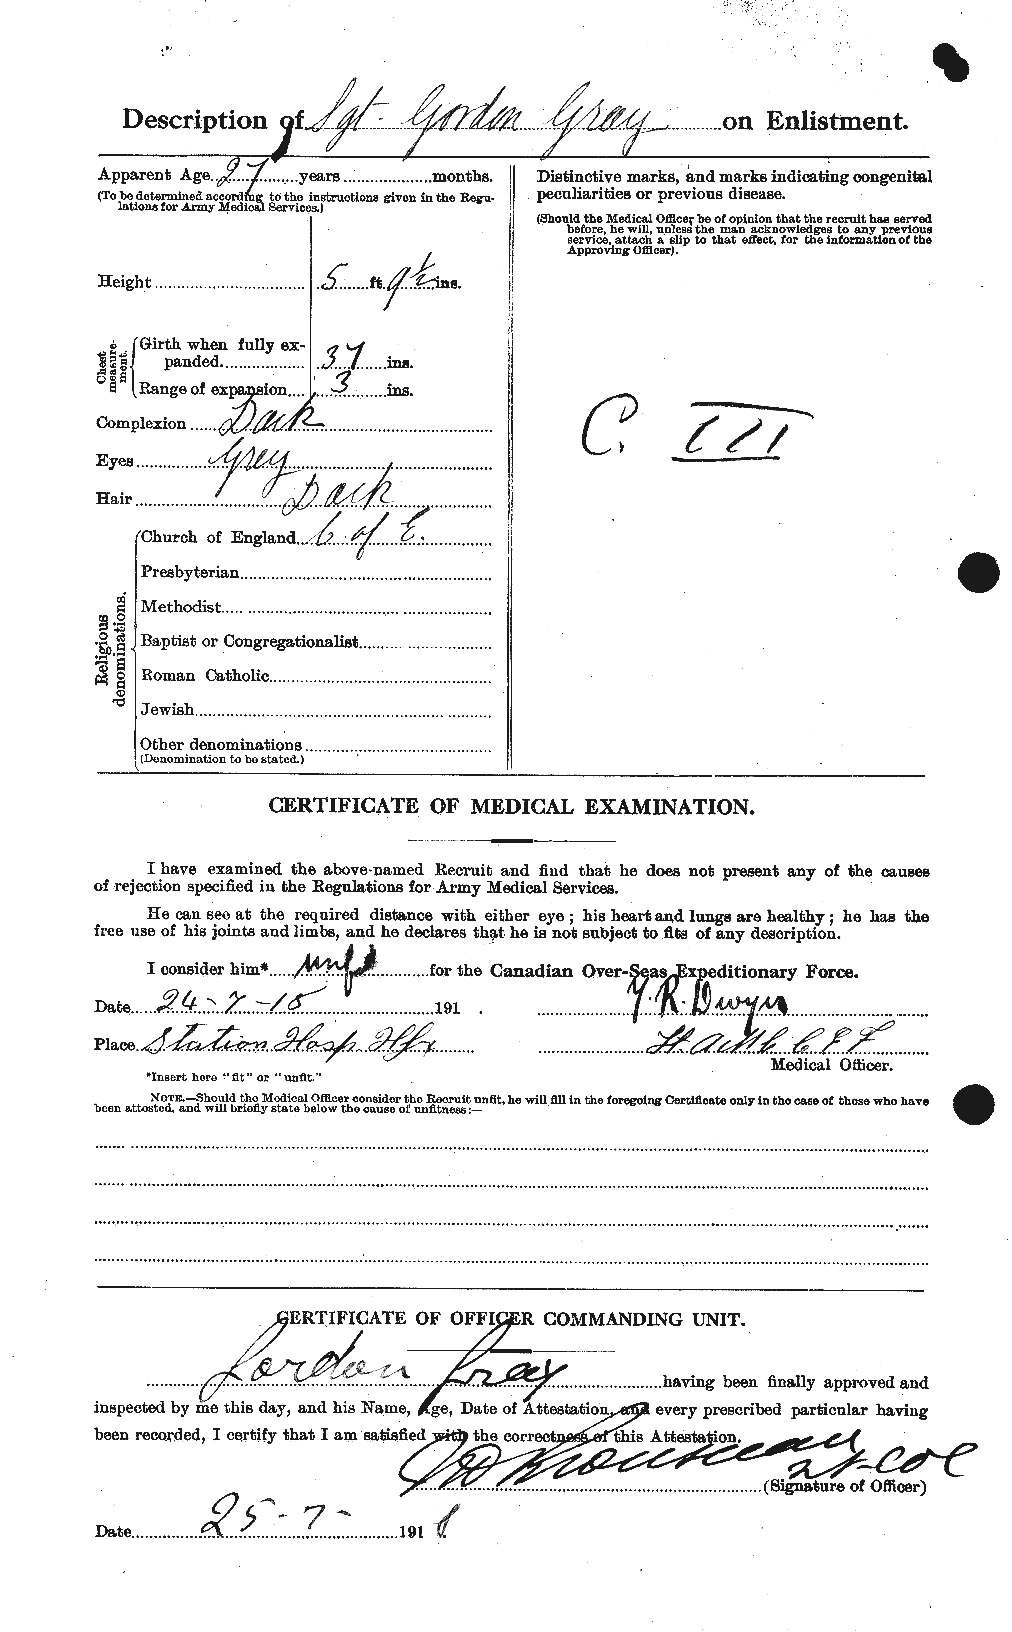 Personnel Records of the First World War - CEF 361627b